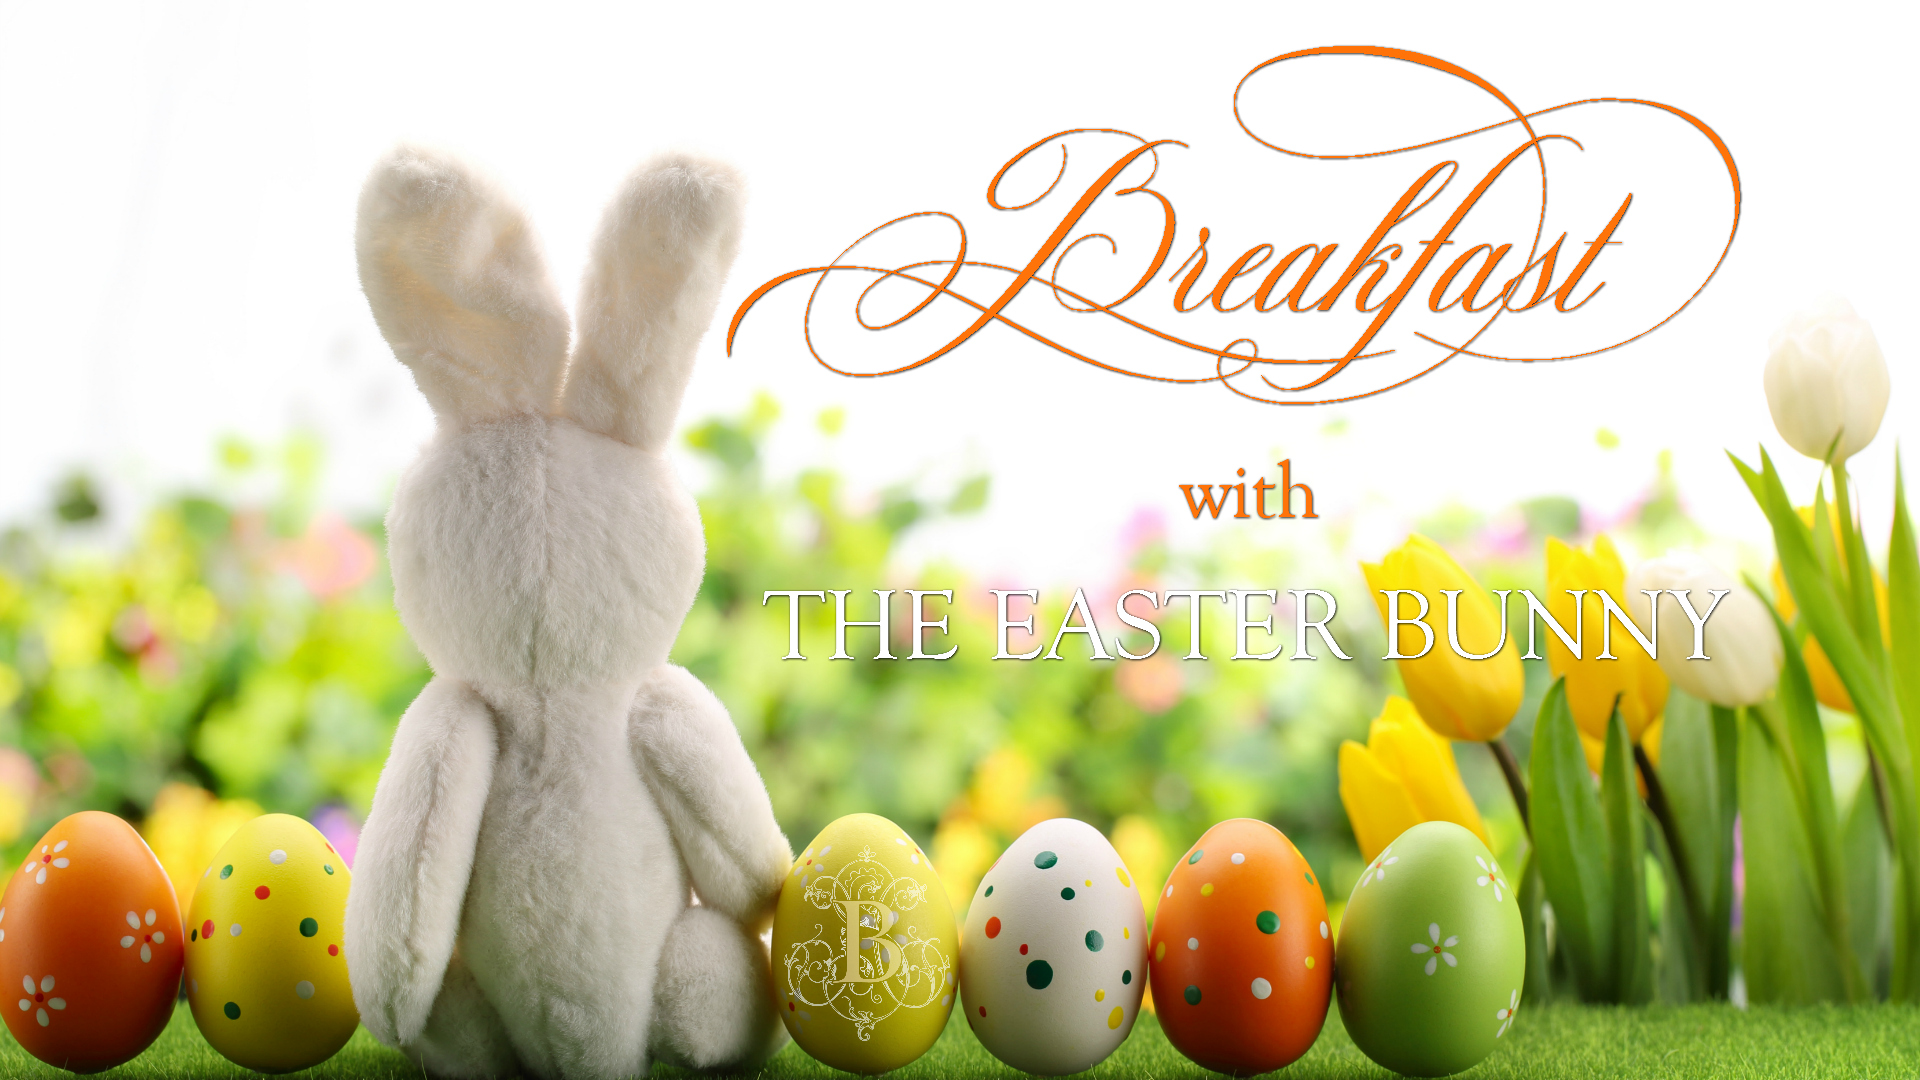 Breakfast with the Easter Bunny | Visit Somerset County NJ